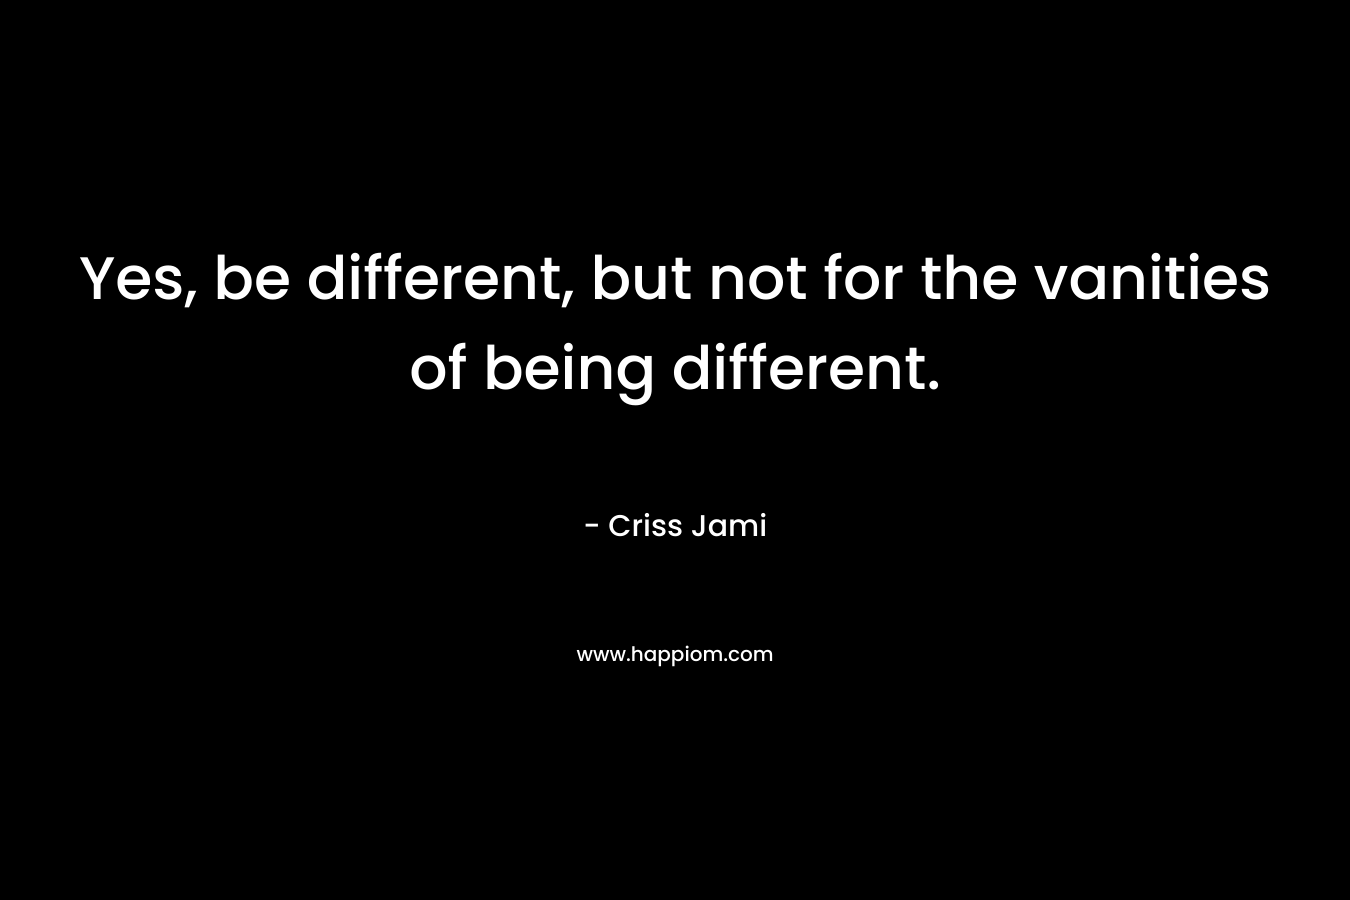 Yes, be different, but not for the vanities of being different. – Criss Jami